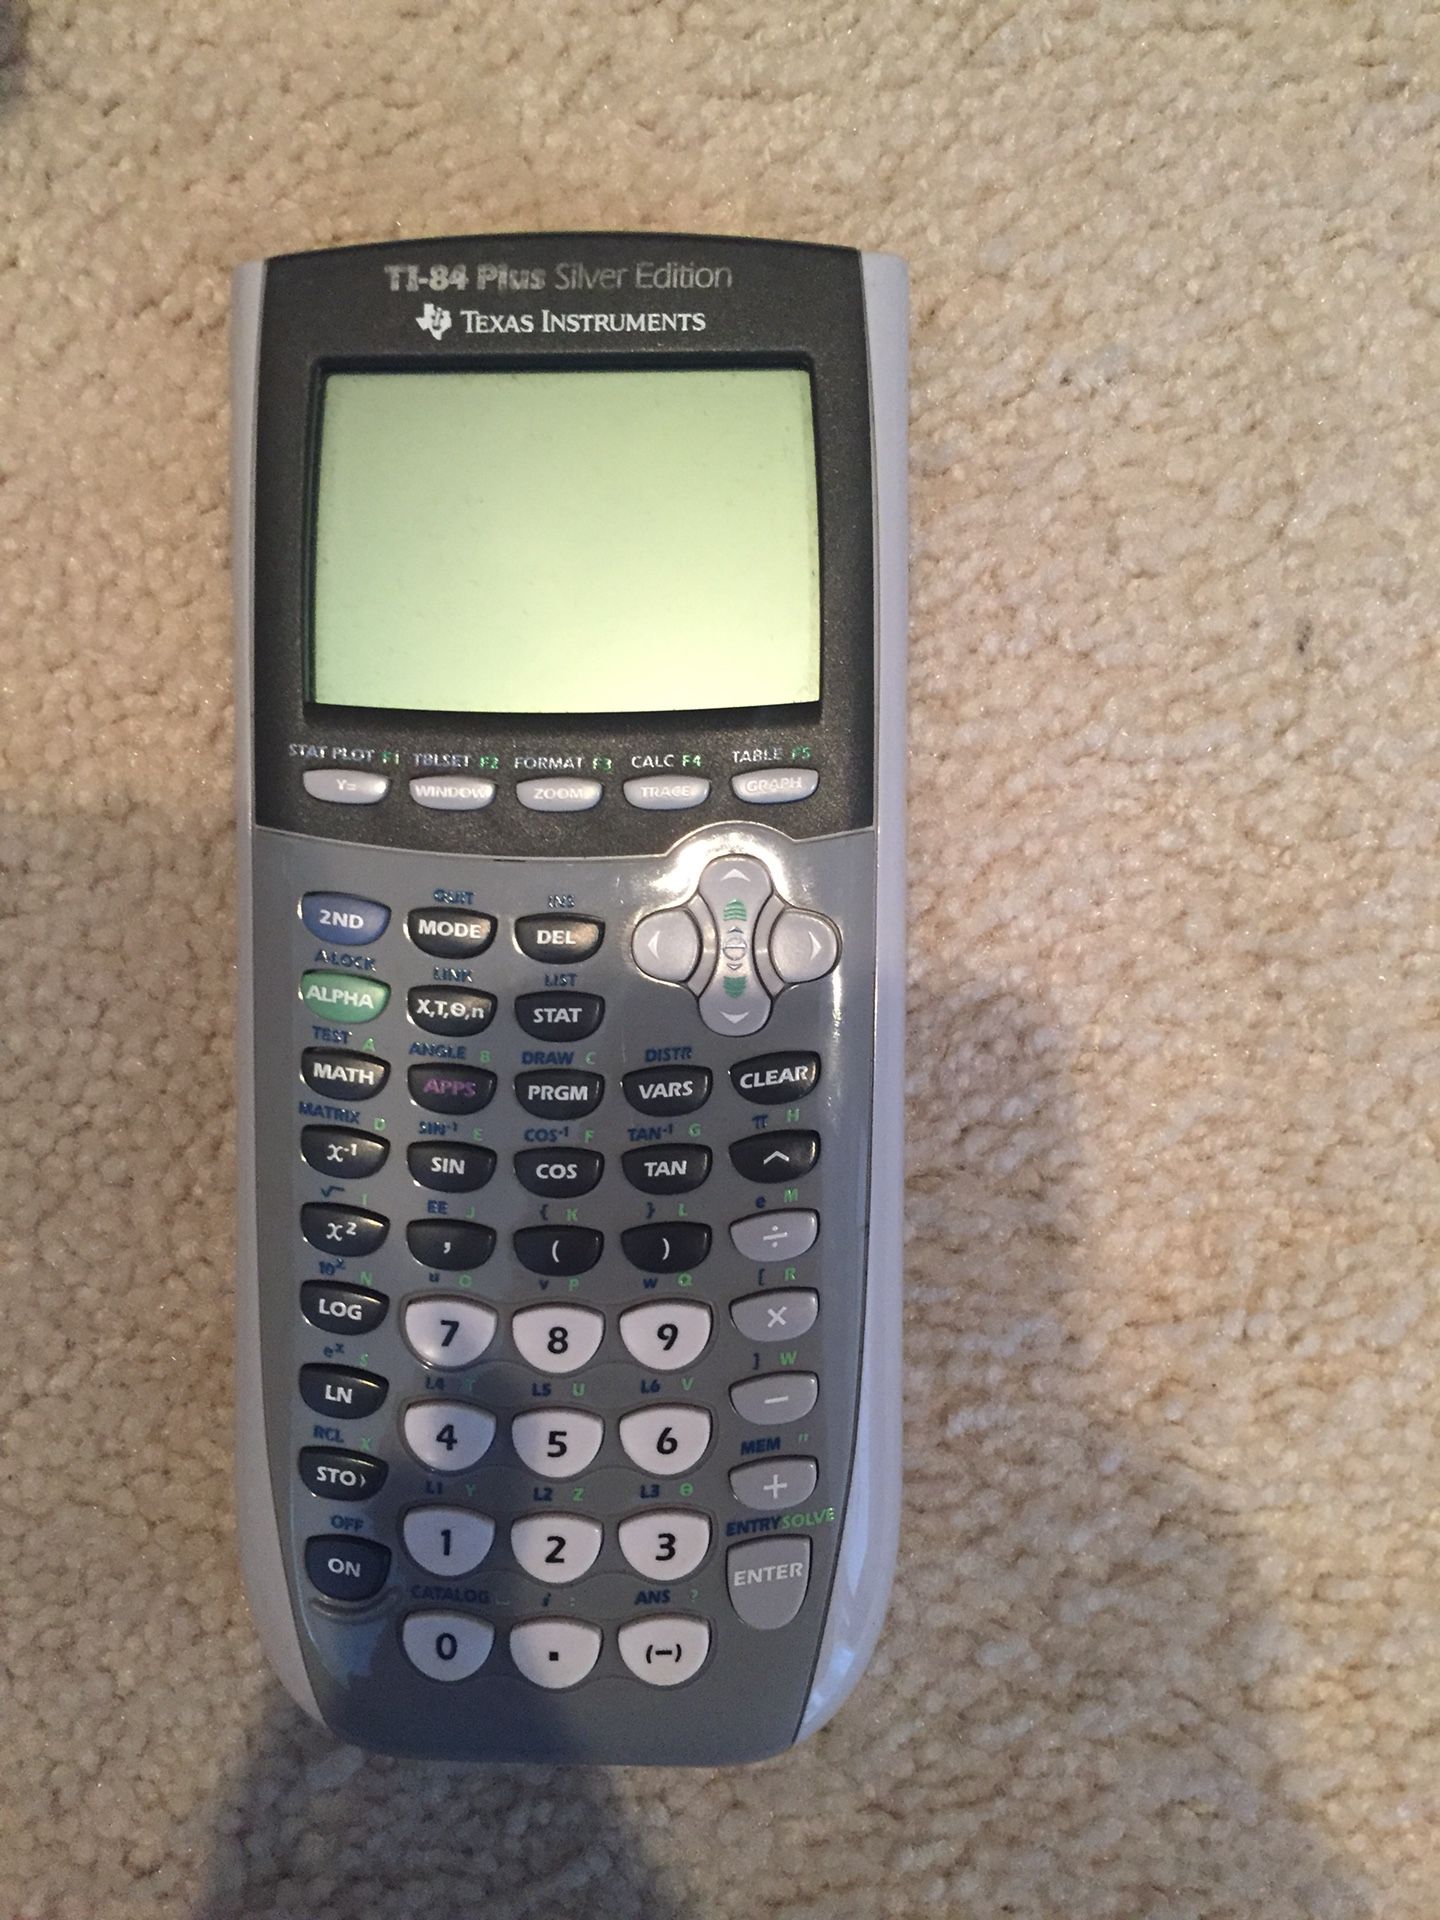 EXCELLENT CONDITION Texas Instruments TI 84 Plus Graphing Calculator